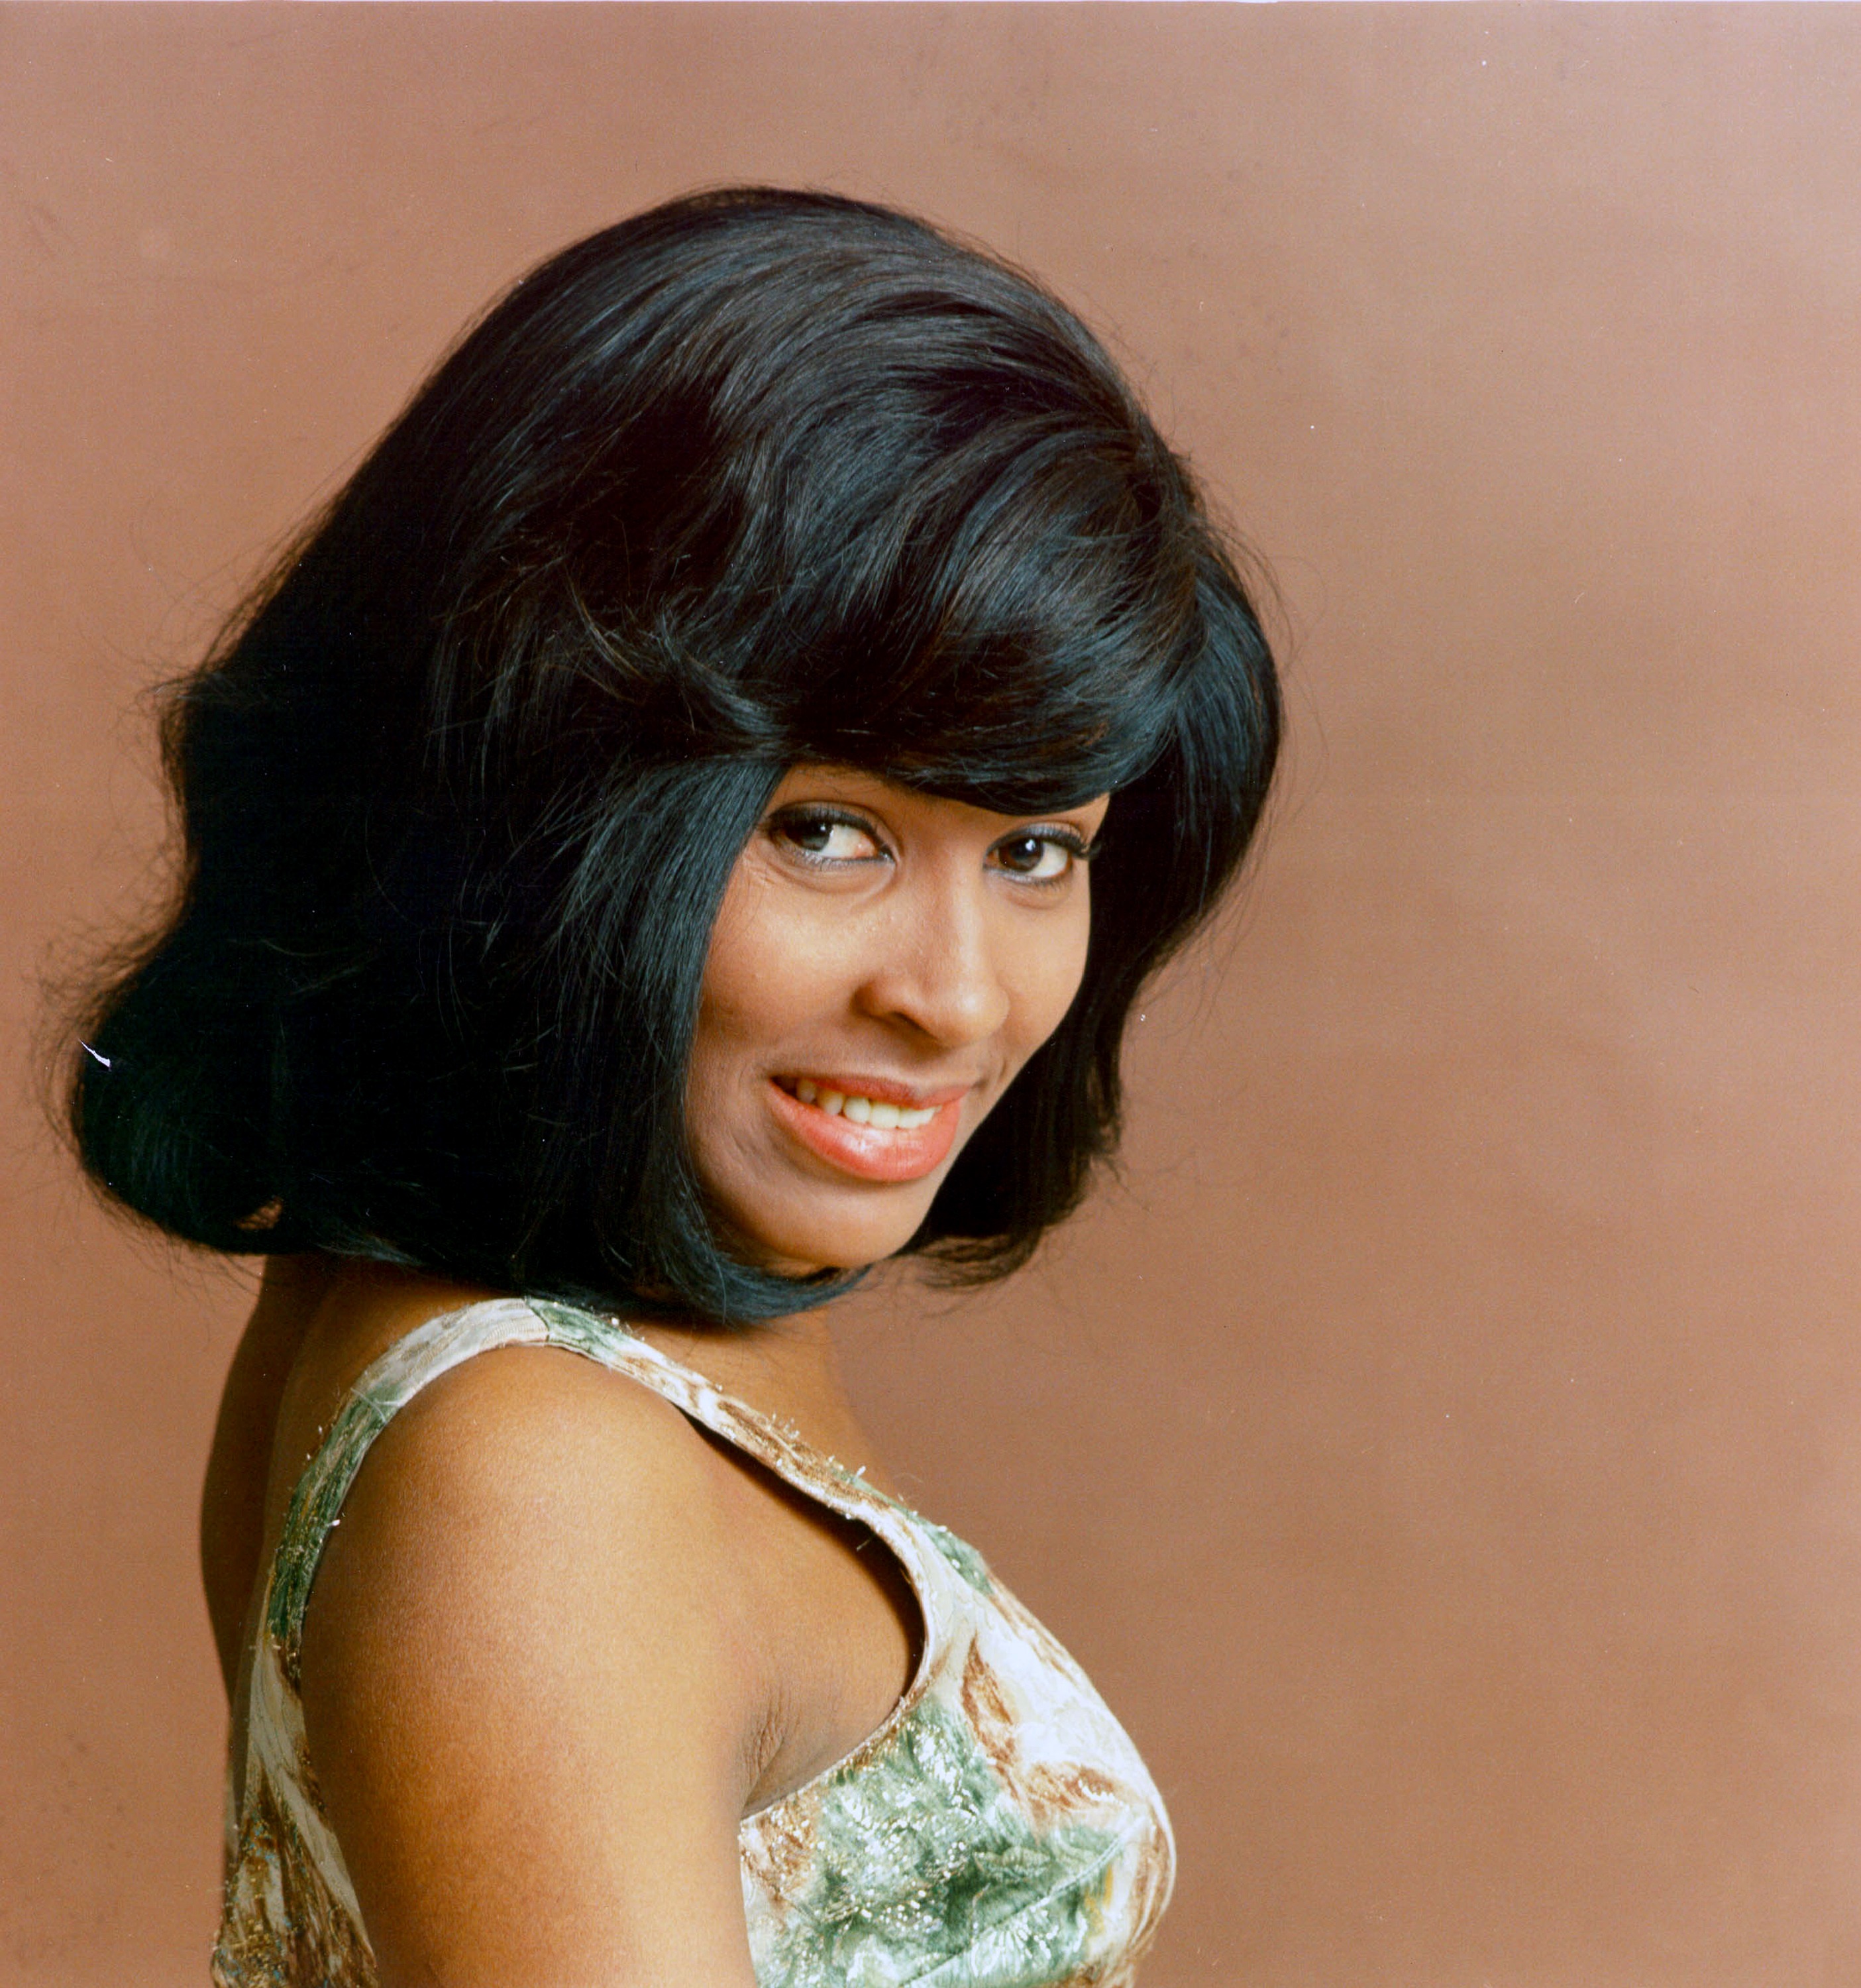 The singer poses for a portrait in 1964. | Source: Getty Images